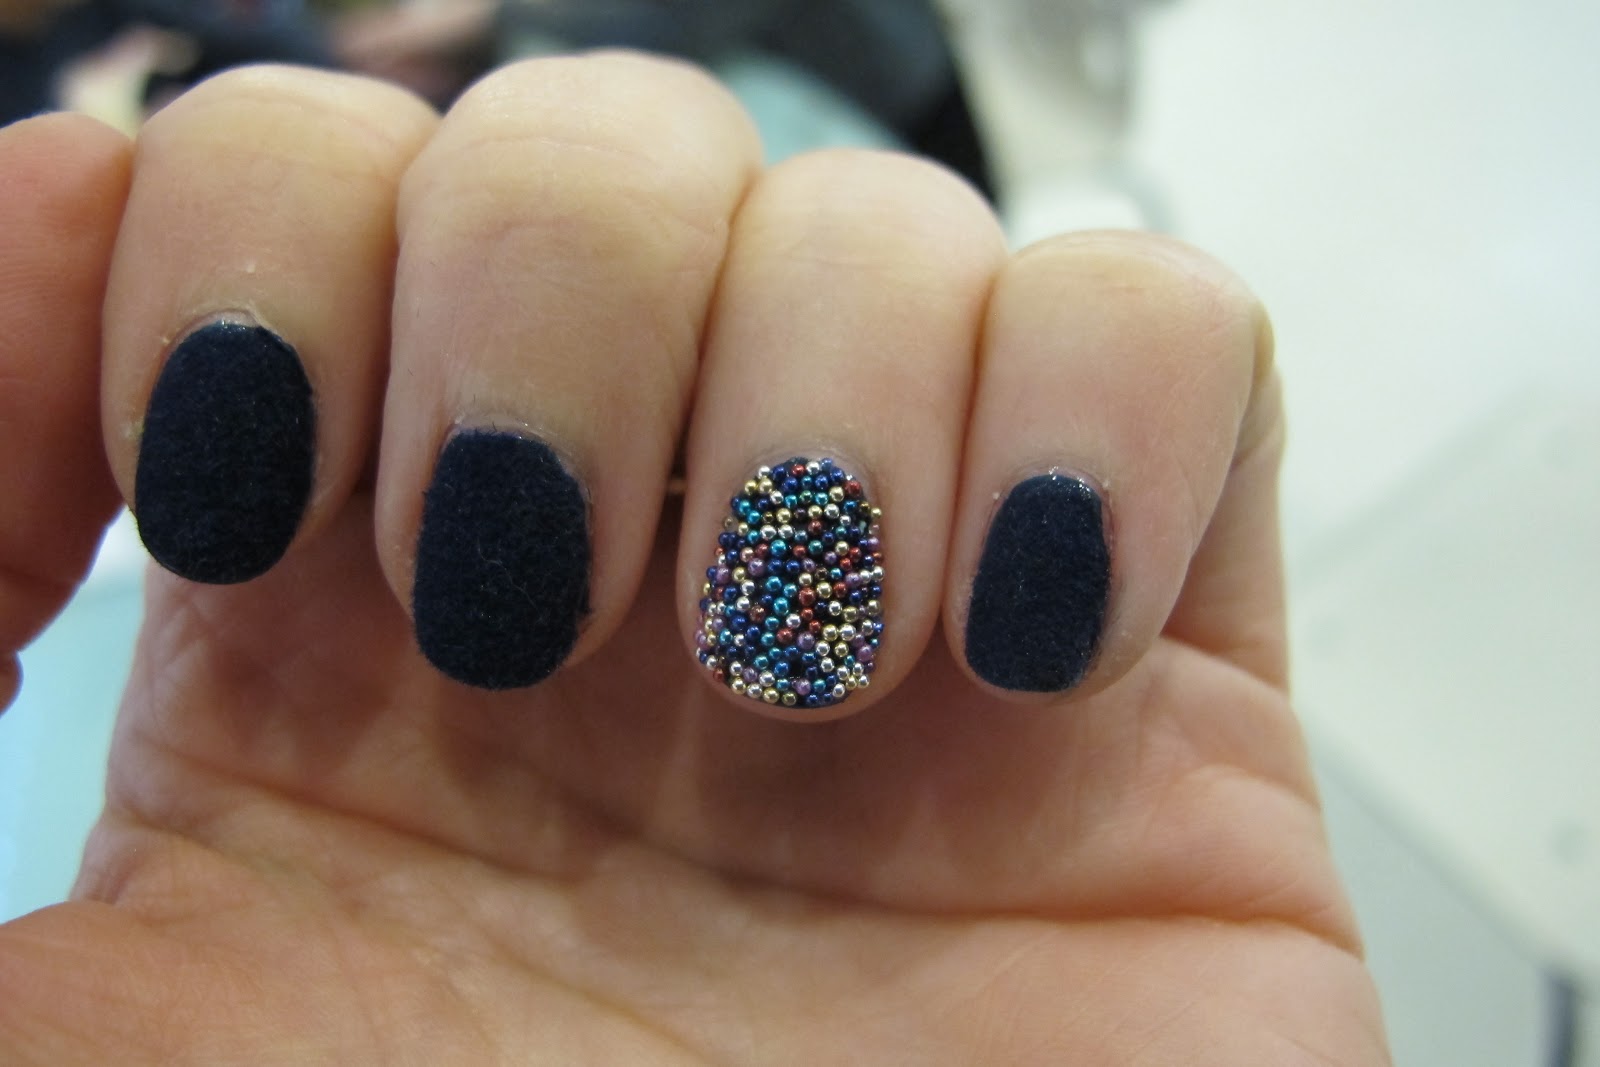 6. How to Create a Caviar Effect on Nails - wide 8